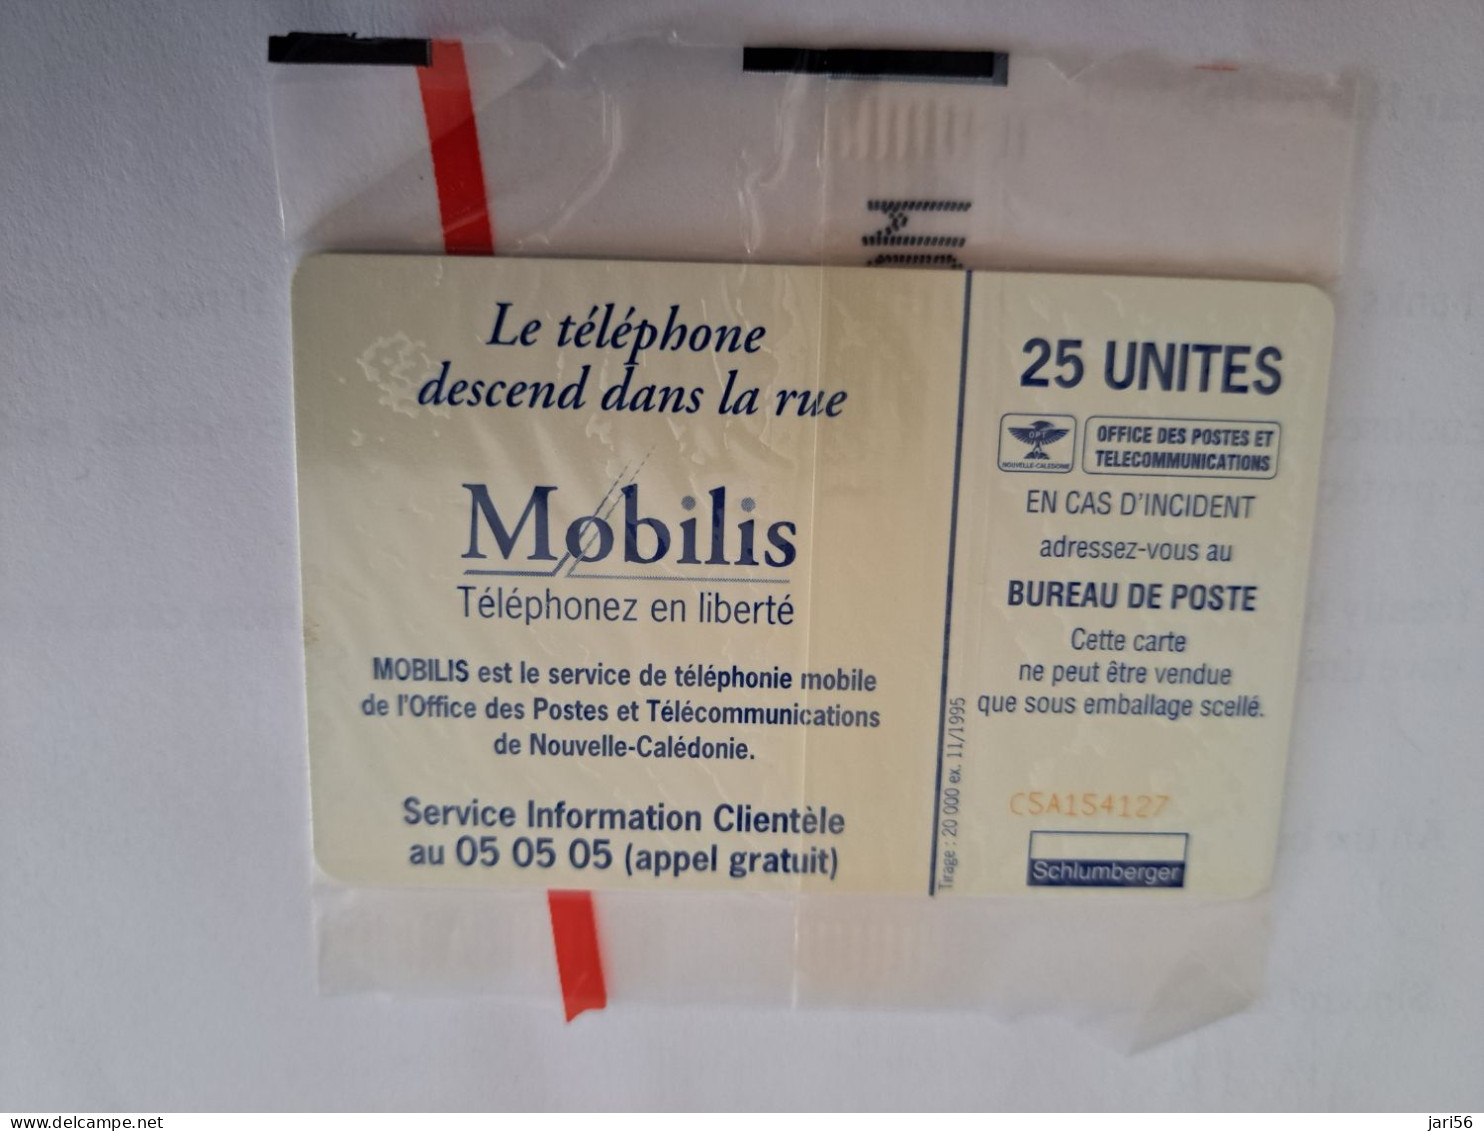 NOUVELLE CALEDONIA  CHIP CARD 25  UNITS / MAN ON THE PHONE /MOBILIS   / MINT IN WRAPPER  ** 13546 ** - Nouvelle-Calédonie